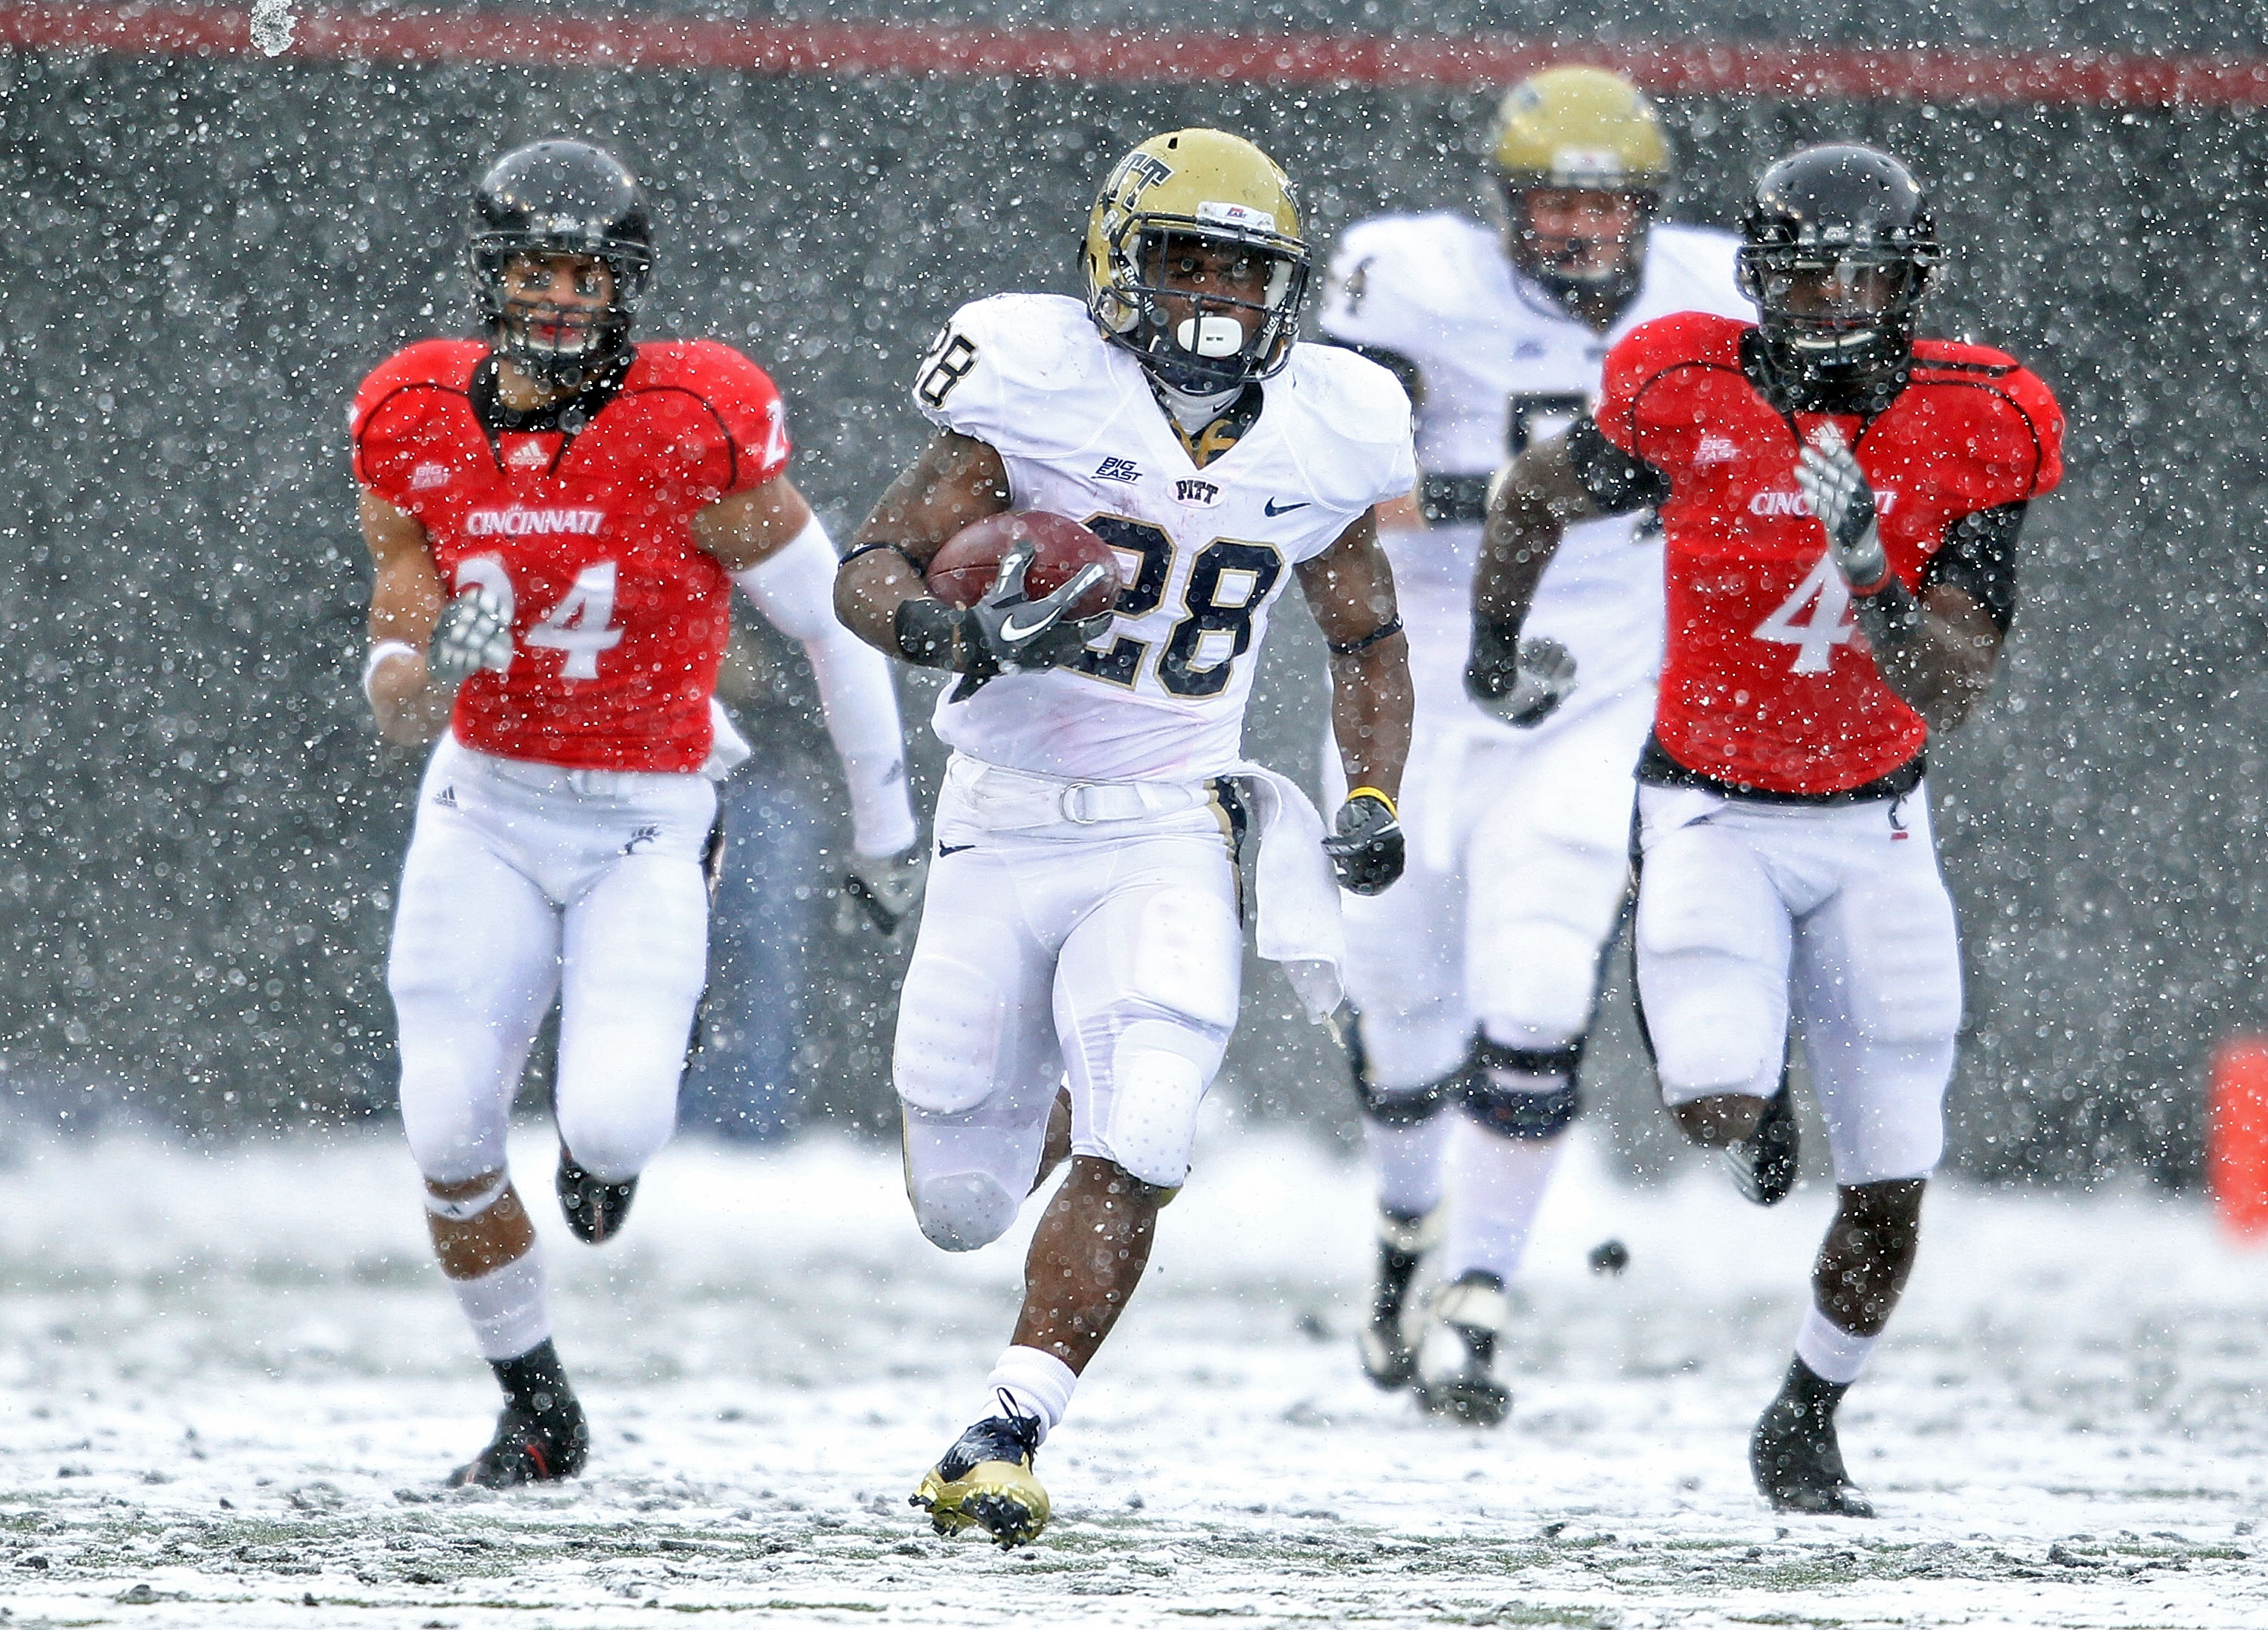 CINCINNATI, OH - DECEMBER 04:  Dion Lewis #28 of the Pittsburgh Panthers runs for a touchdown during the Big East Conference game against the Cincinnati Bearcats at Nippert Stadium on December 4, 2010 in Cincinnati, Ohio.  Pittsburgh won 28-10.  (Photo by